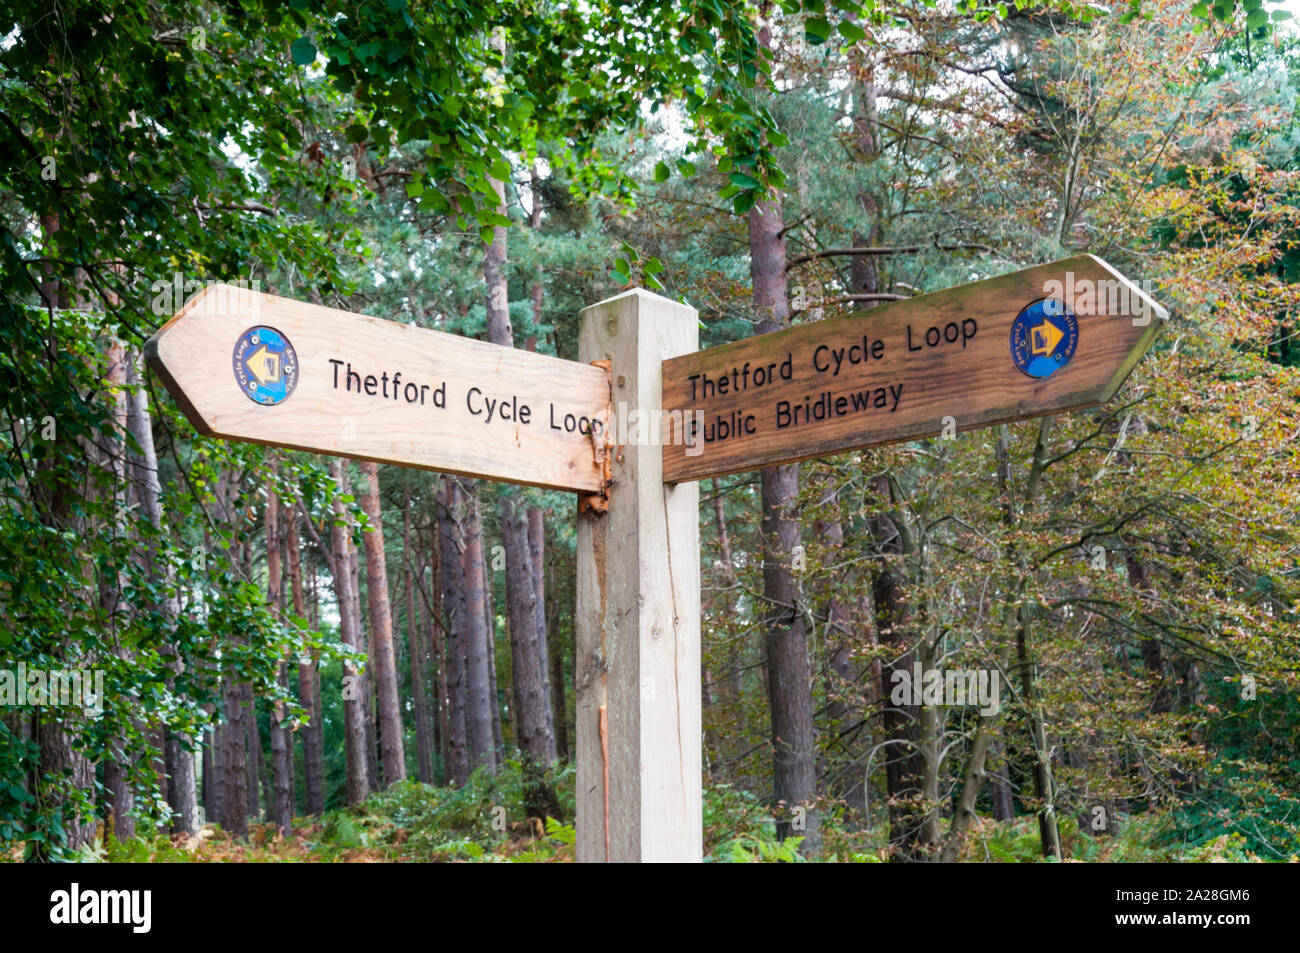 Signpost for Thetford Cycle Loop and a public bridleway in Thetford Forest. Stock Photo